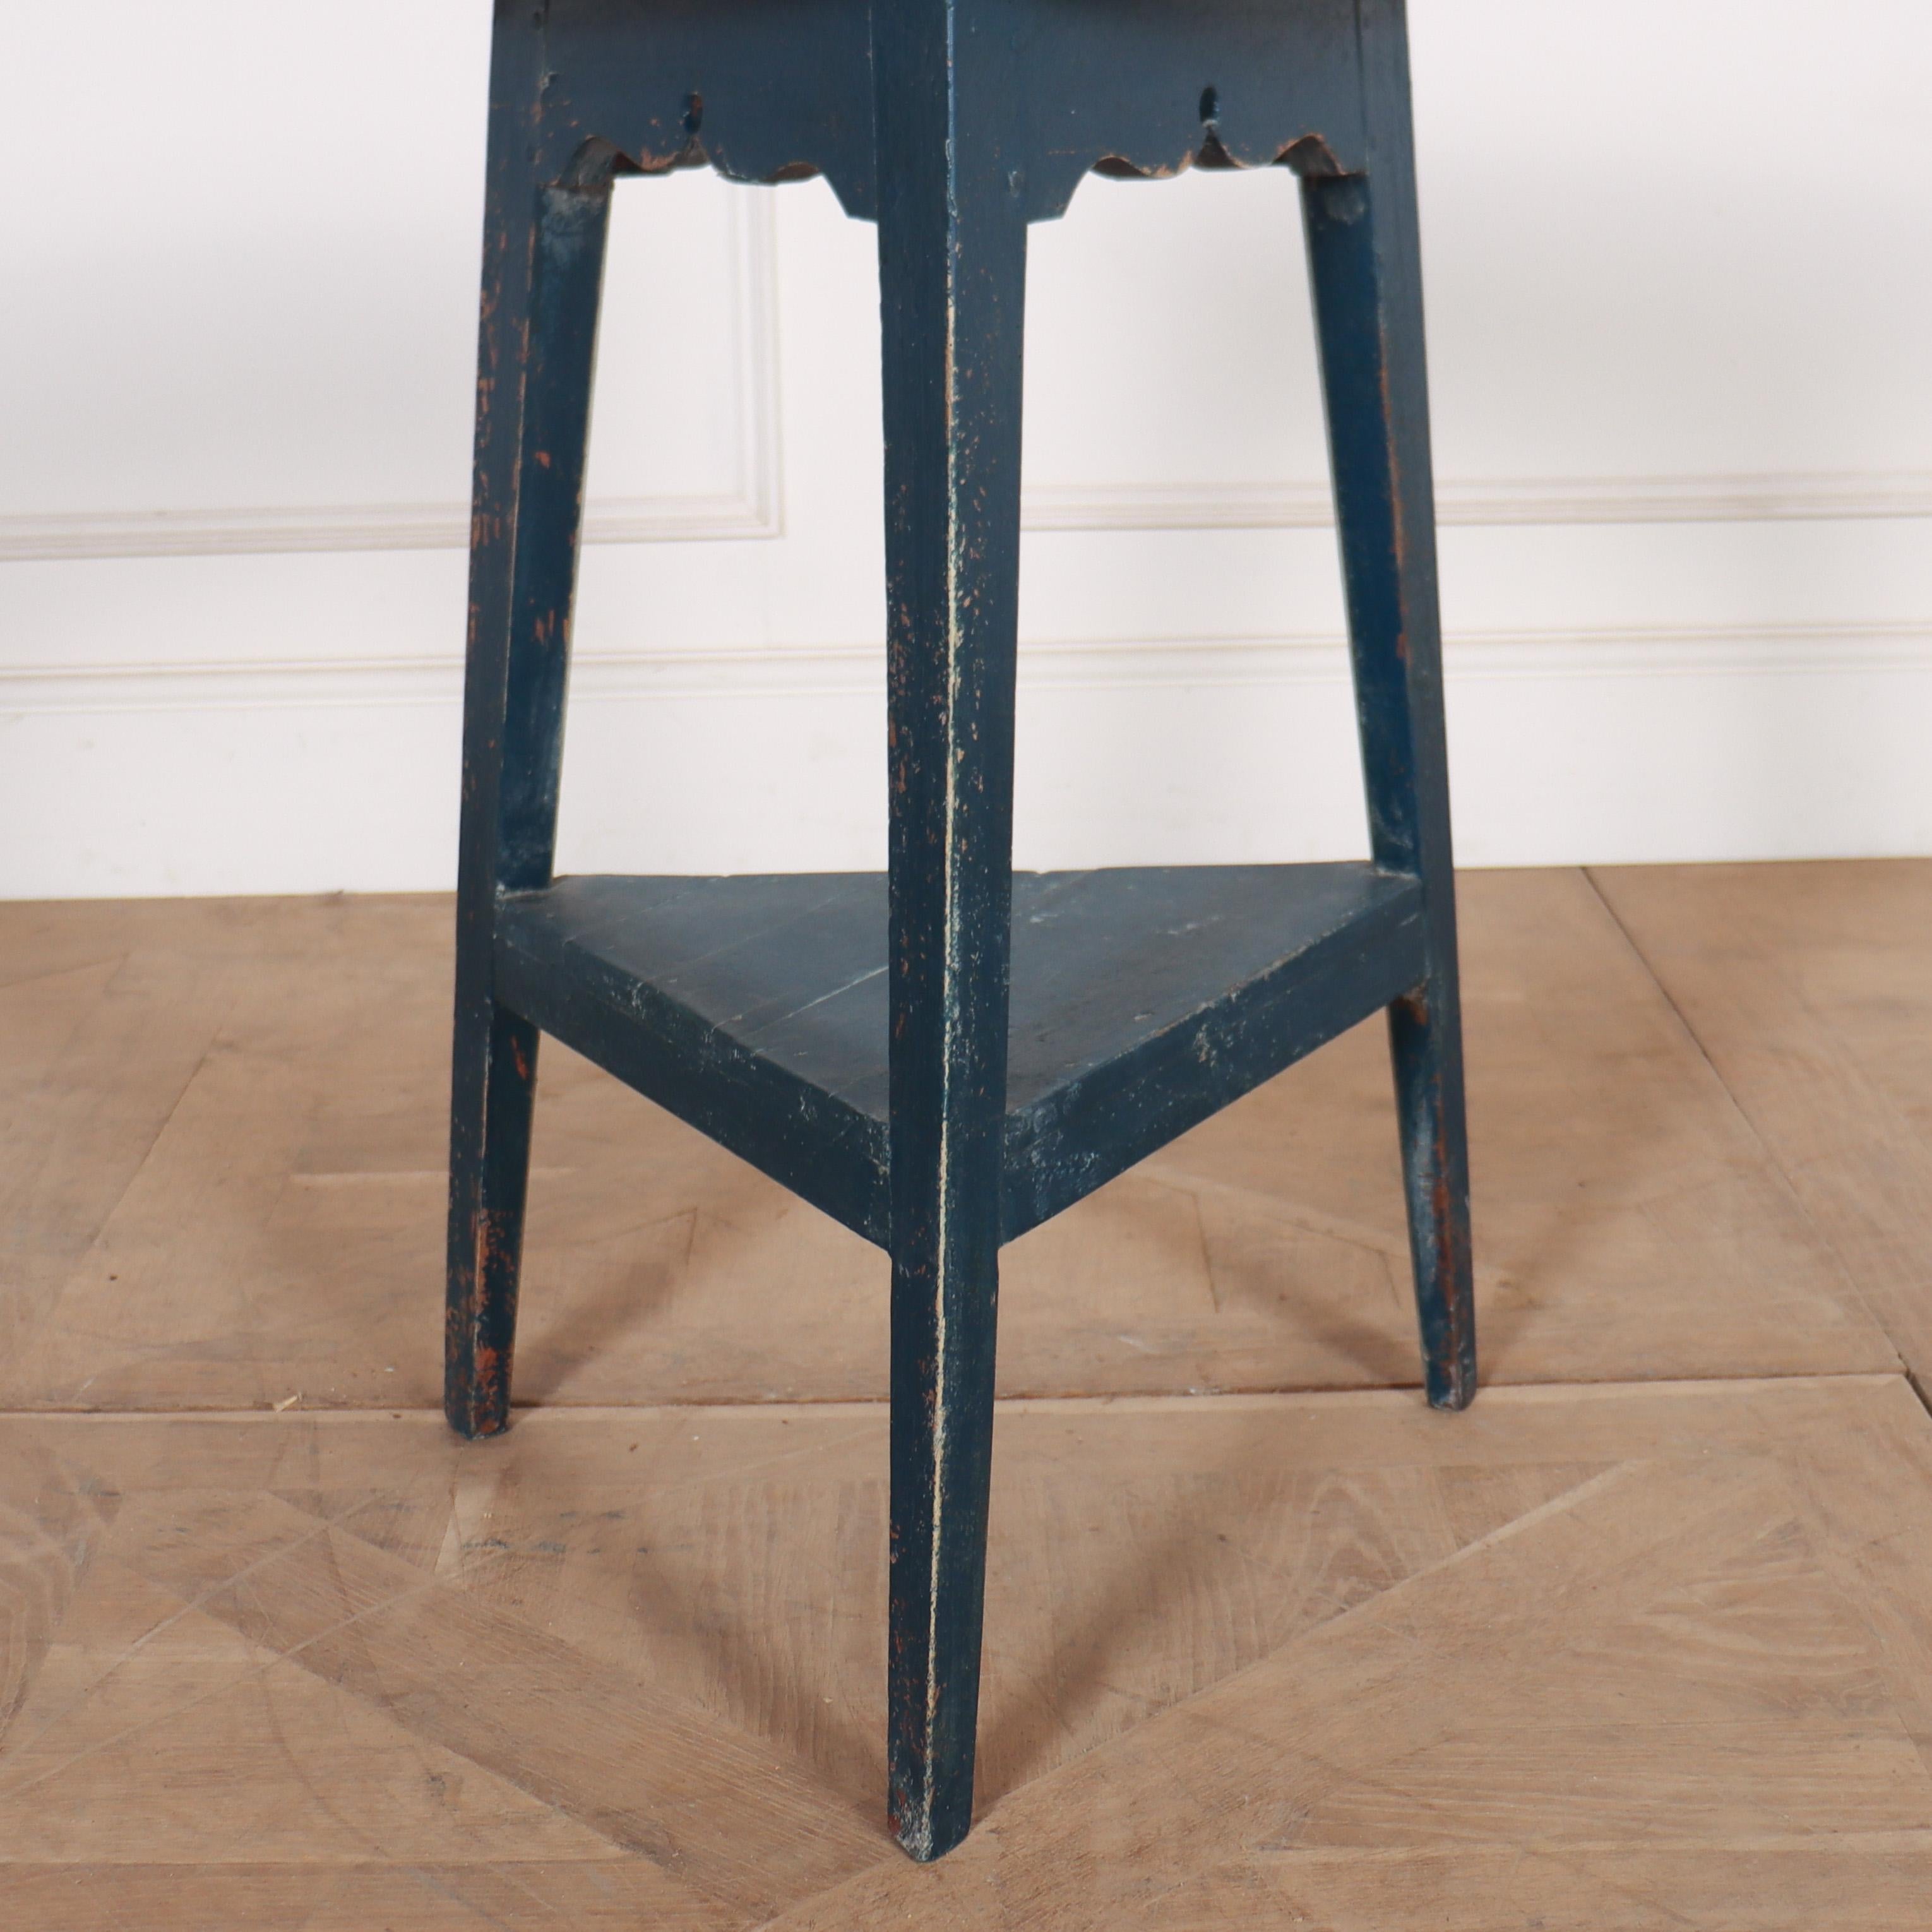 19th C Welsh painted pine cricket table. 1880.

Reference: 8049

Dimensions
27.5 inches (70 cms) High
20 inches (51 cms) Diameter